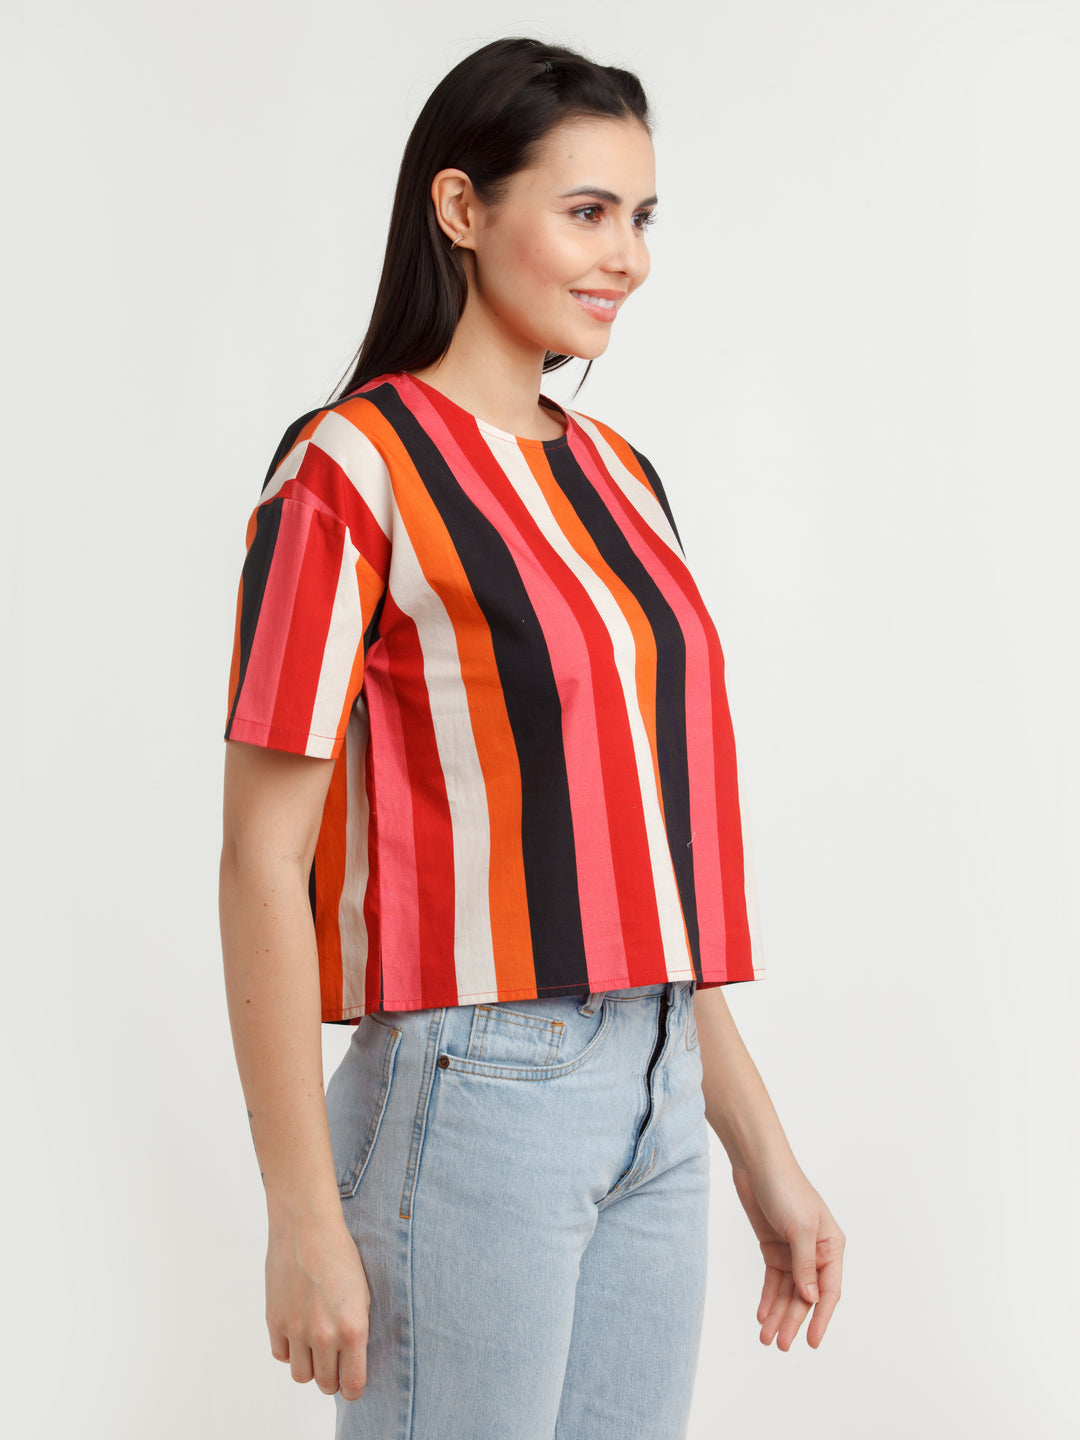 Multi Color Printed Top For Women